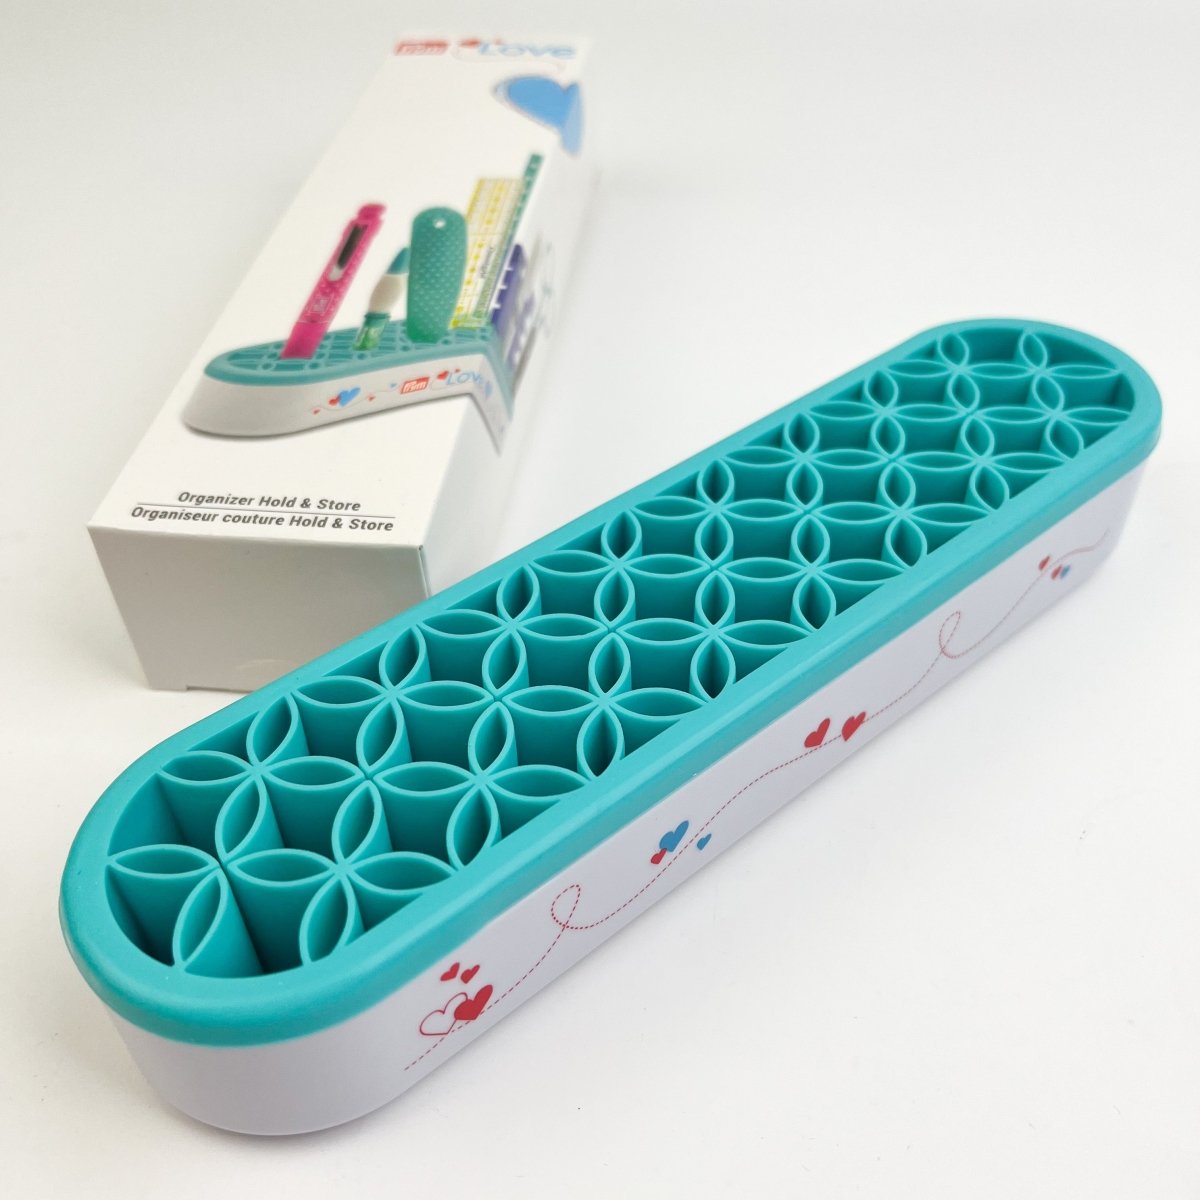 Prym Love - Organiser - Hold and Store - Sewing Gem